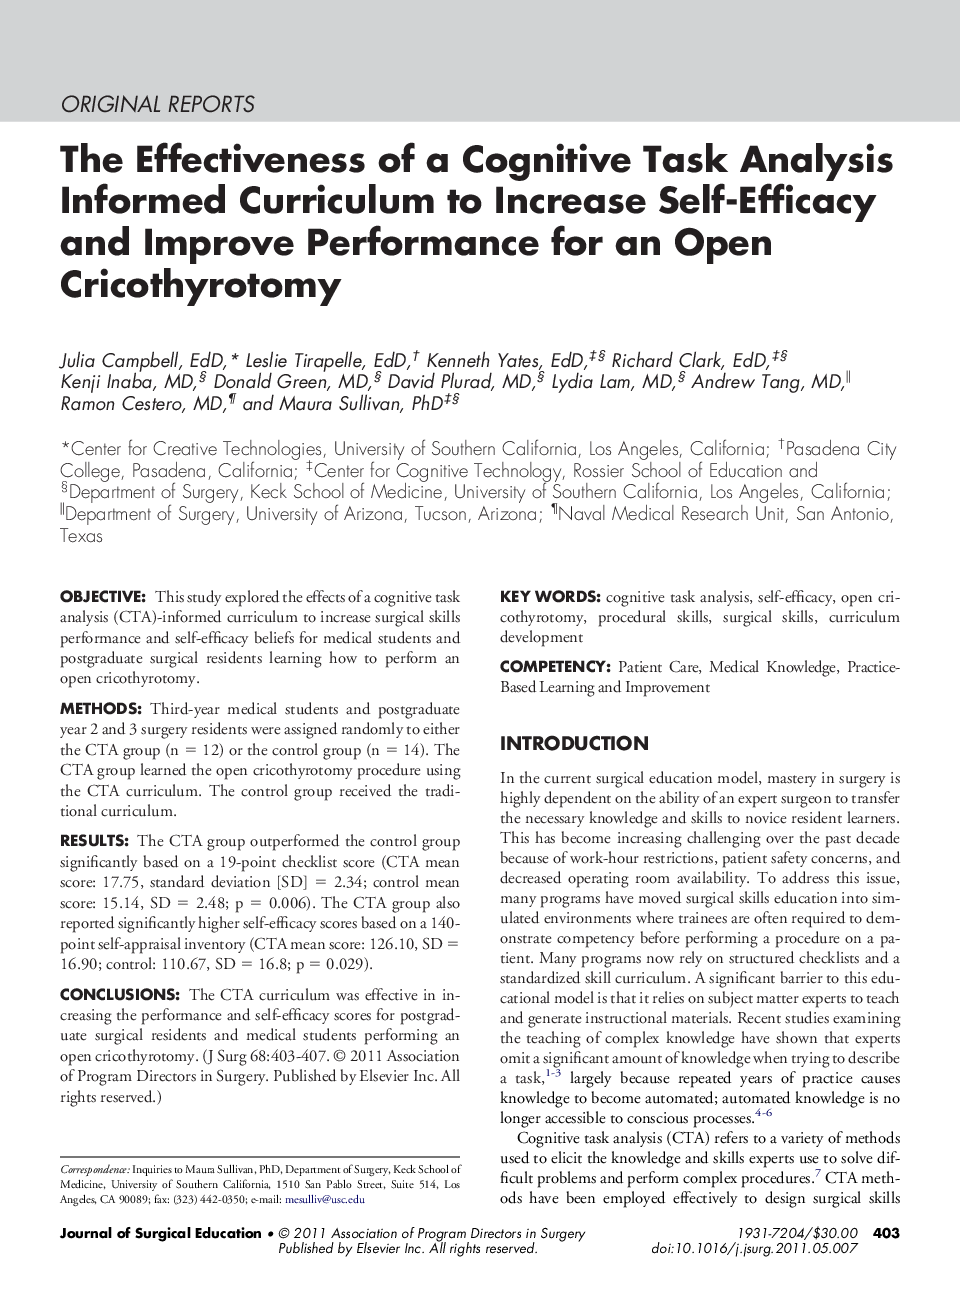 The Effectiveness of a Cognitive Task Analysis Informed Curriculum to Increase Self-Efficacy and Improve Performance for an Open Cricothyrotomy